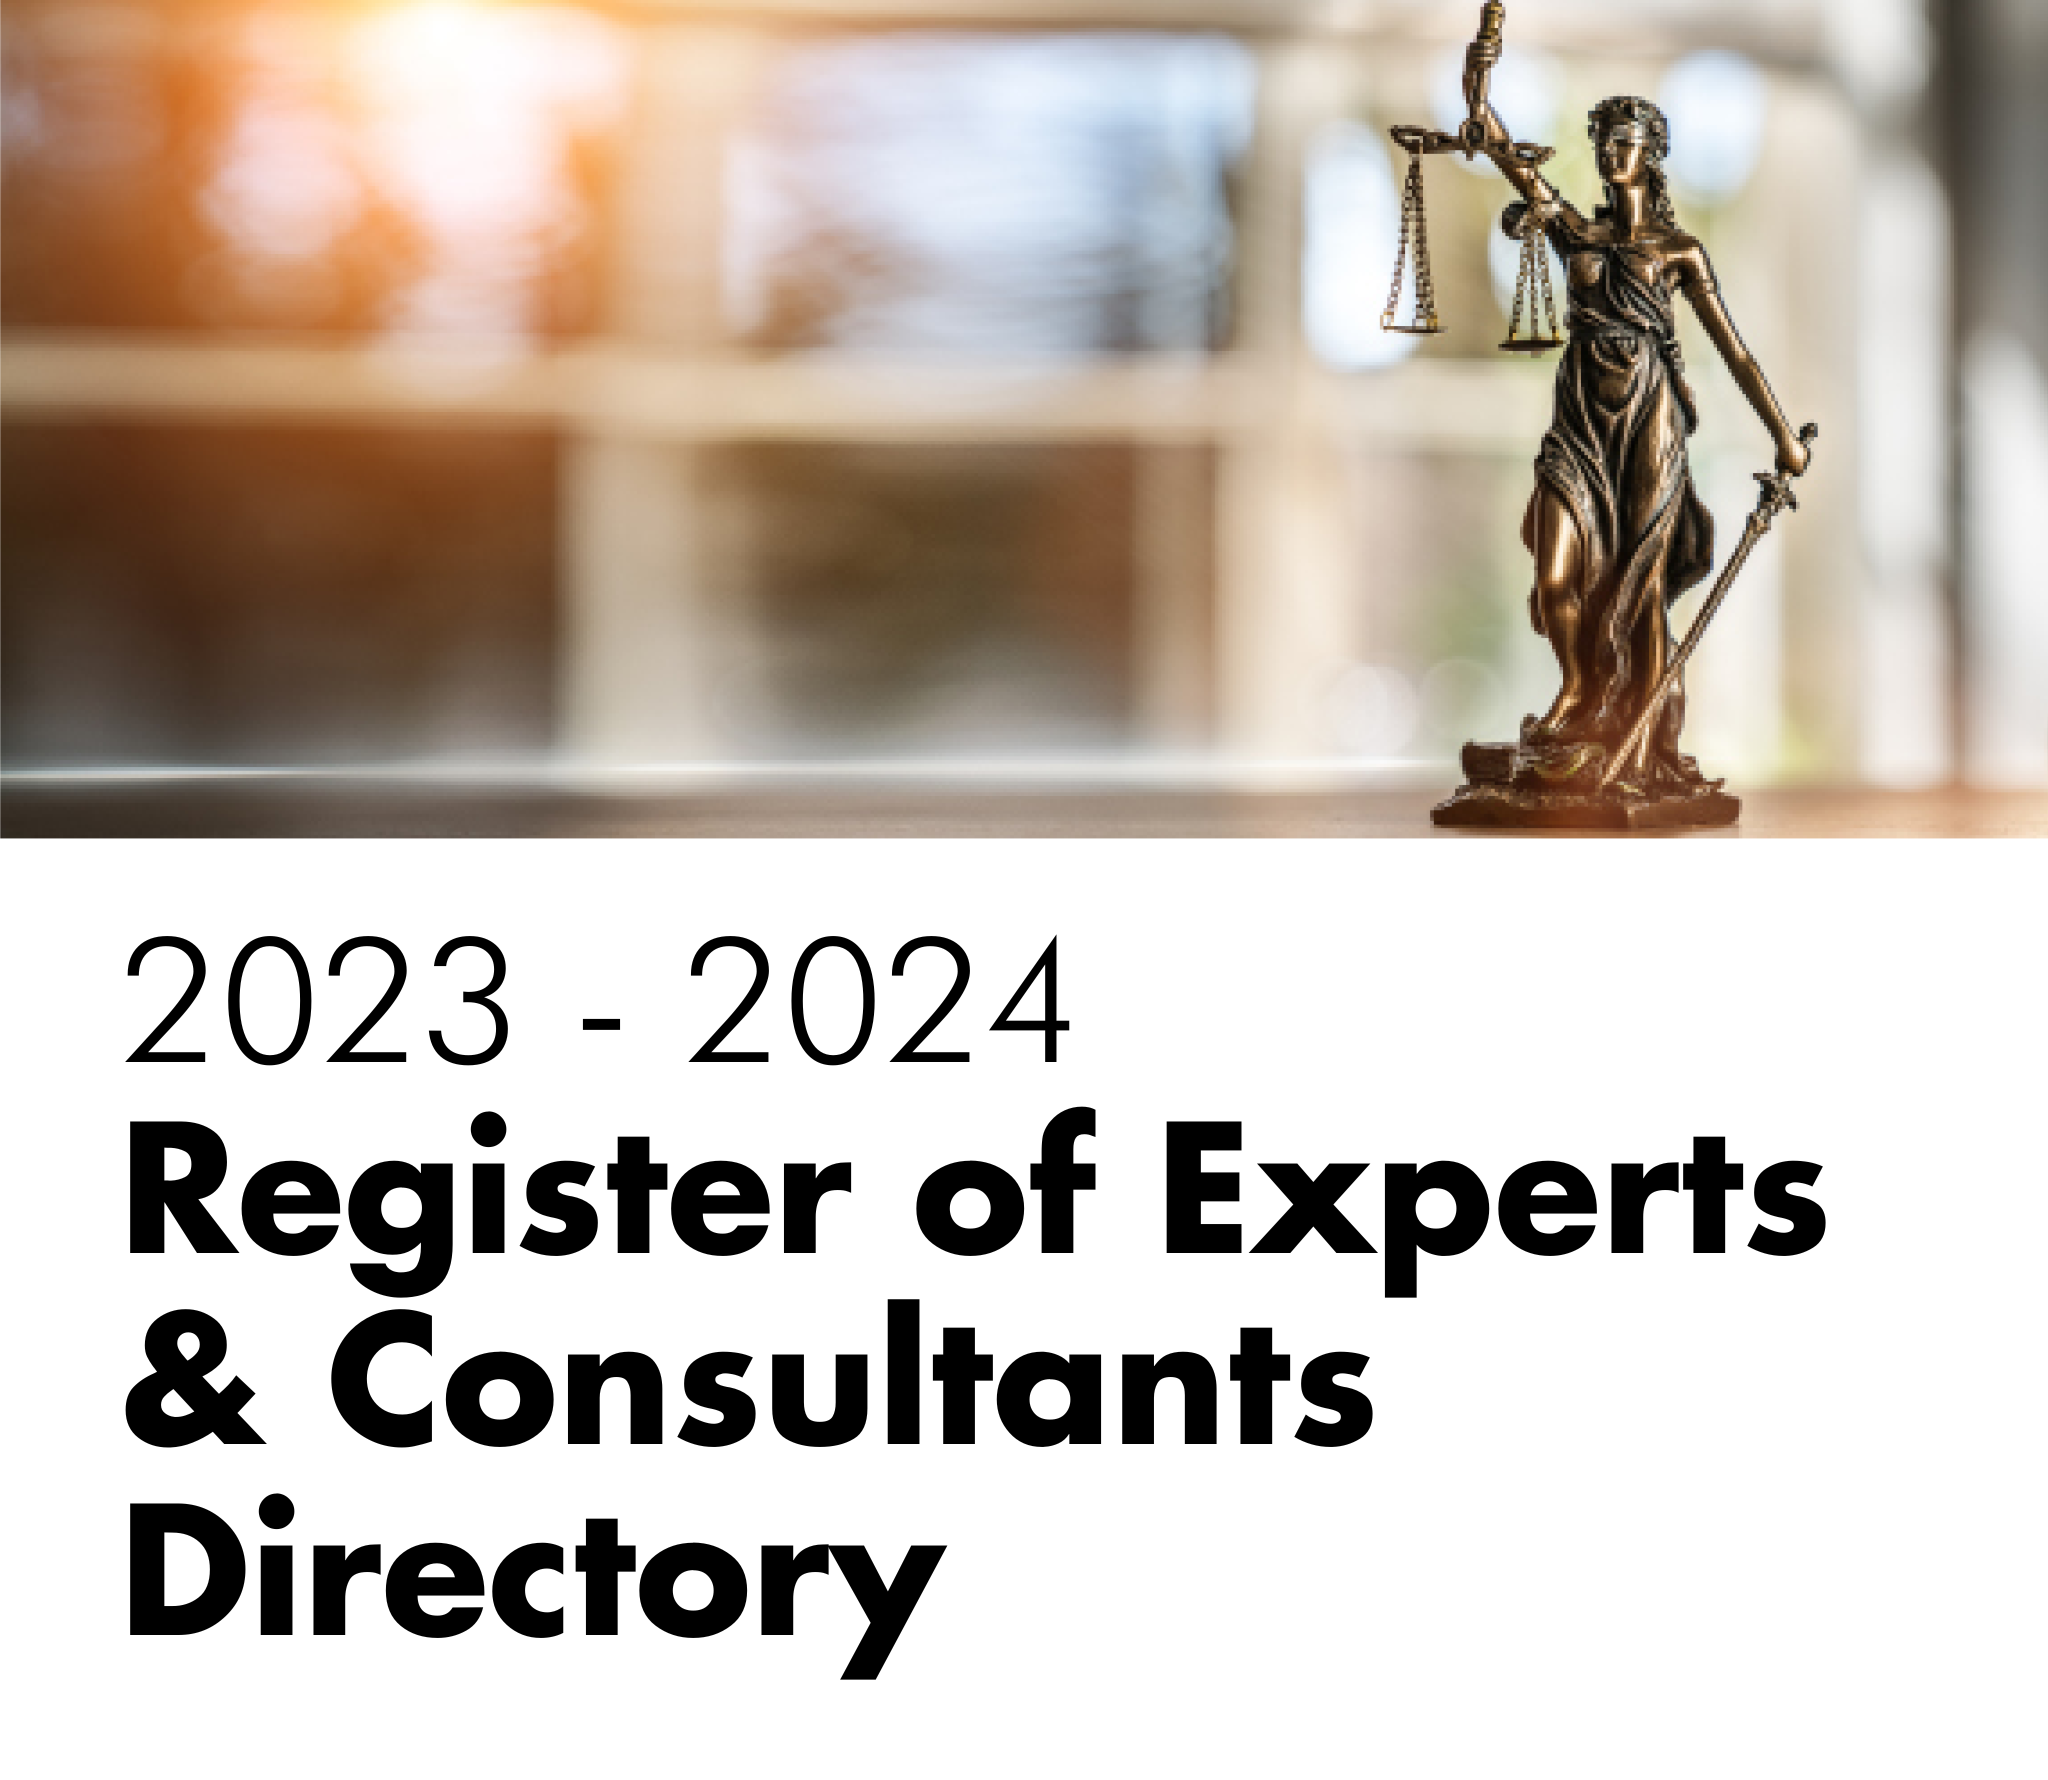 Register of Experts & Consultants Directory